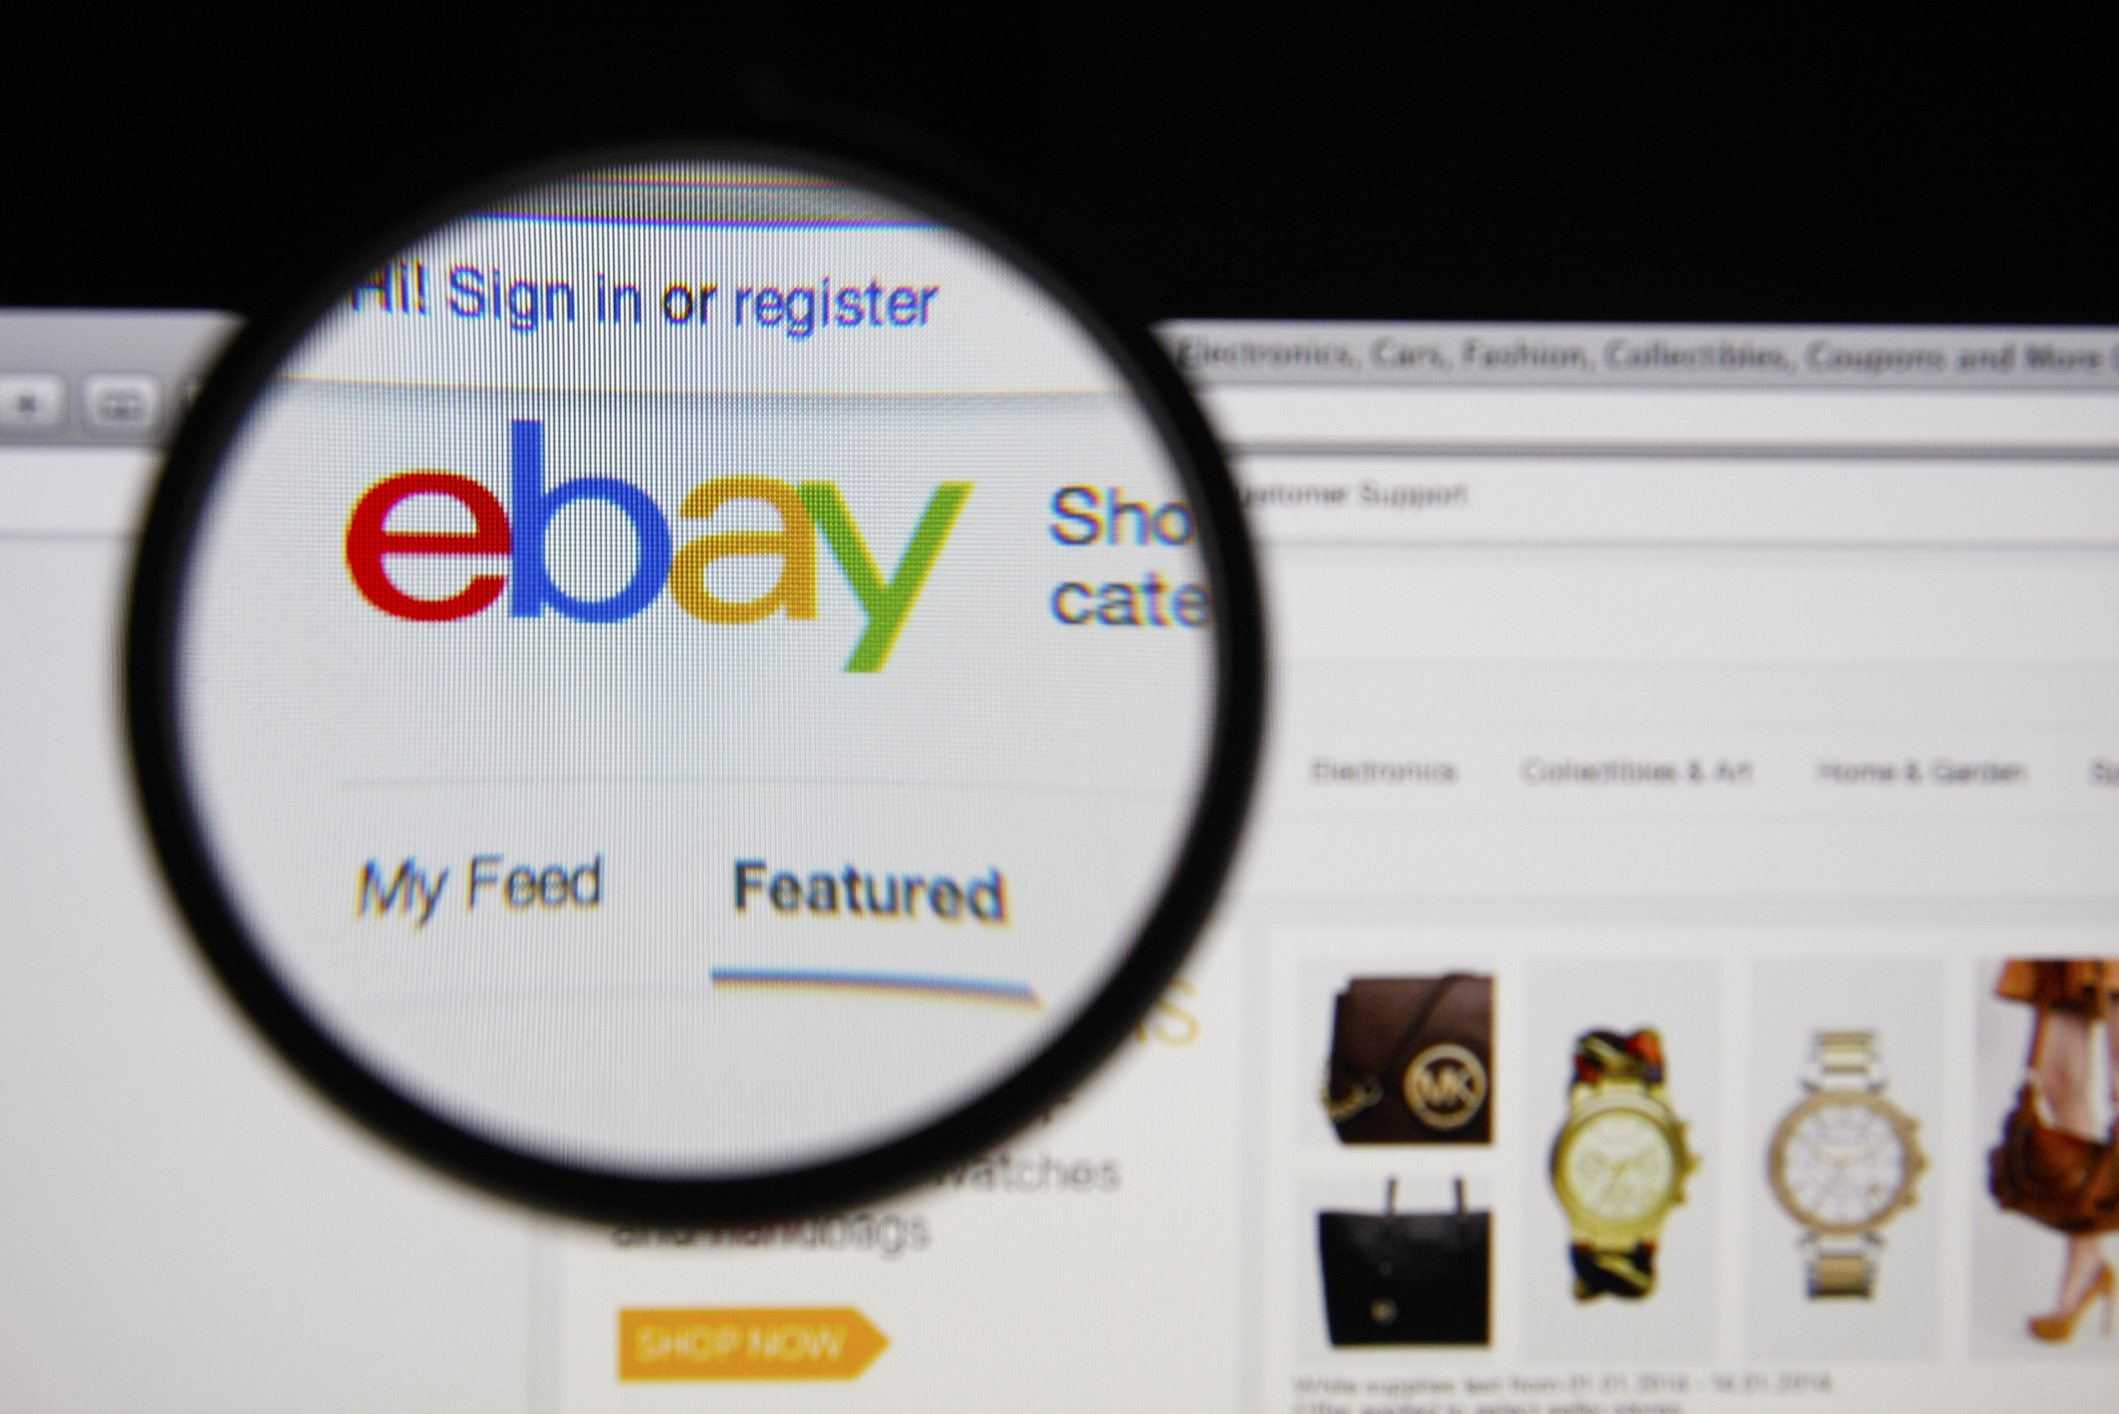 eBay’s Green Monday: 8 great deals today!